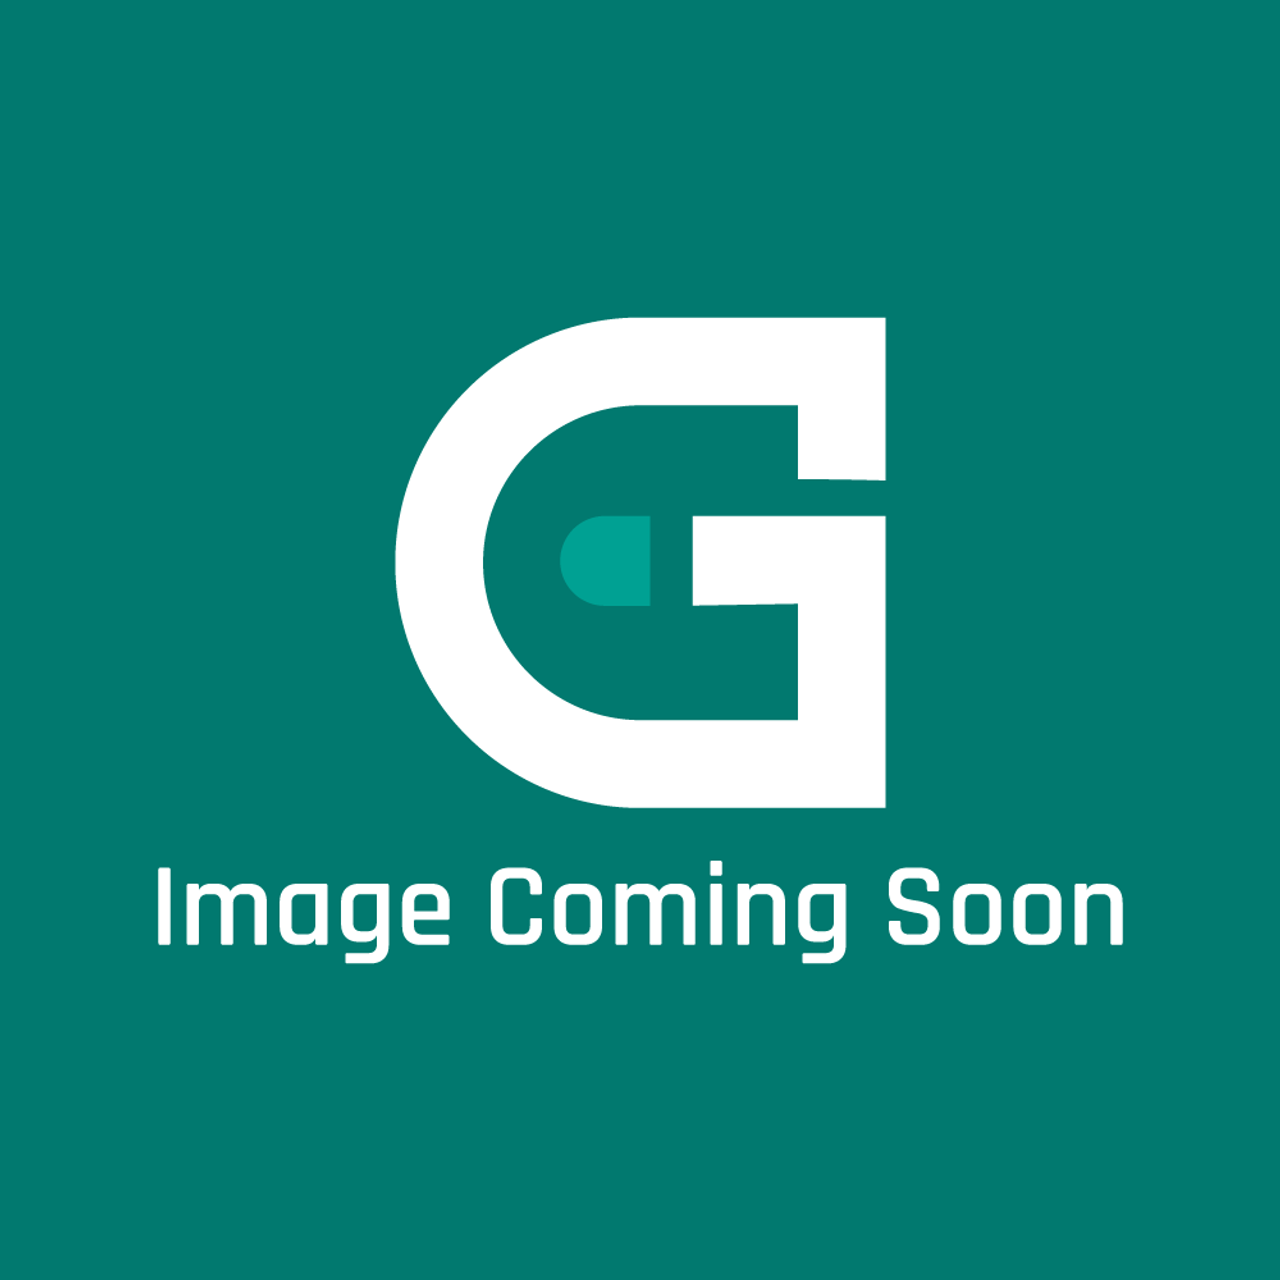 AGA Marvel RS2M301118 - Body (Base & Sides) - Warming Oven - Image Coming Soon!